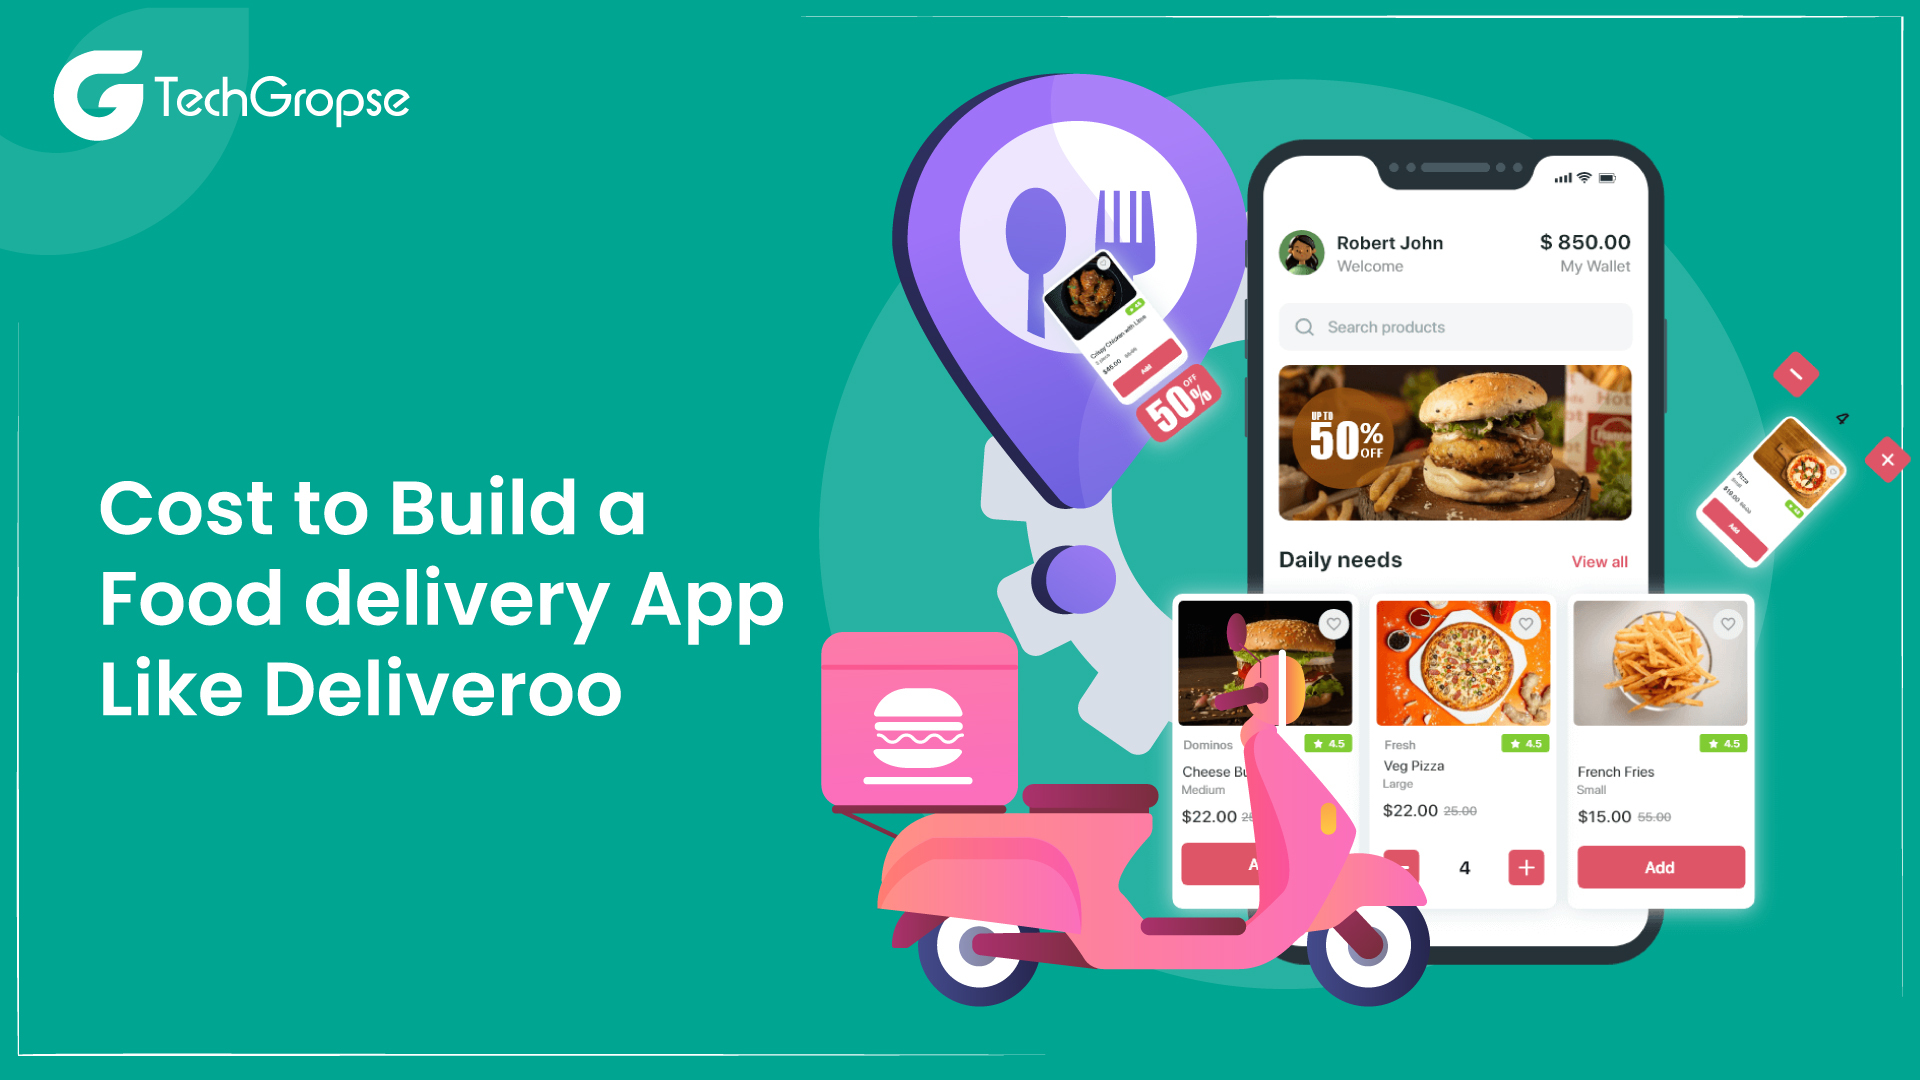 Cost to Build a Food Delivery App Like Deliveroo